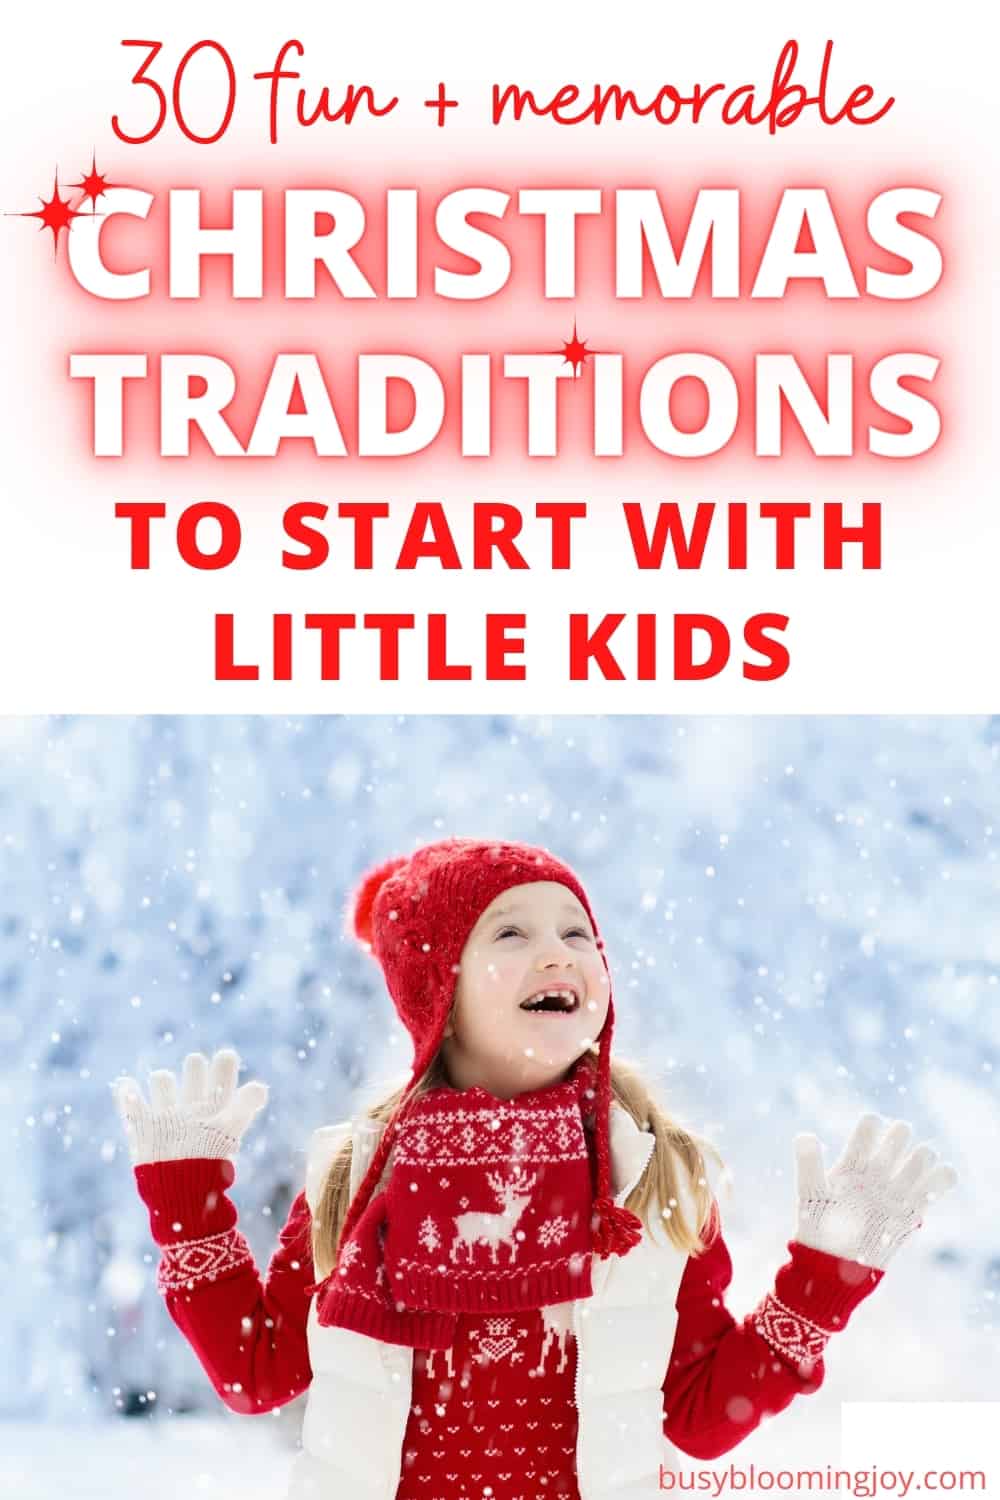 30 fun & memorable family Christmas traditions perfect to start with little kids